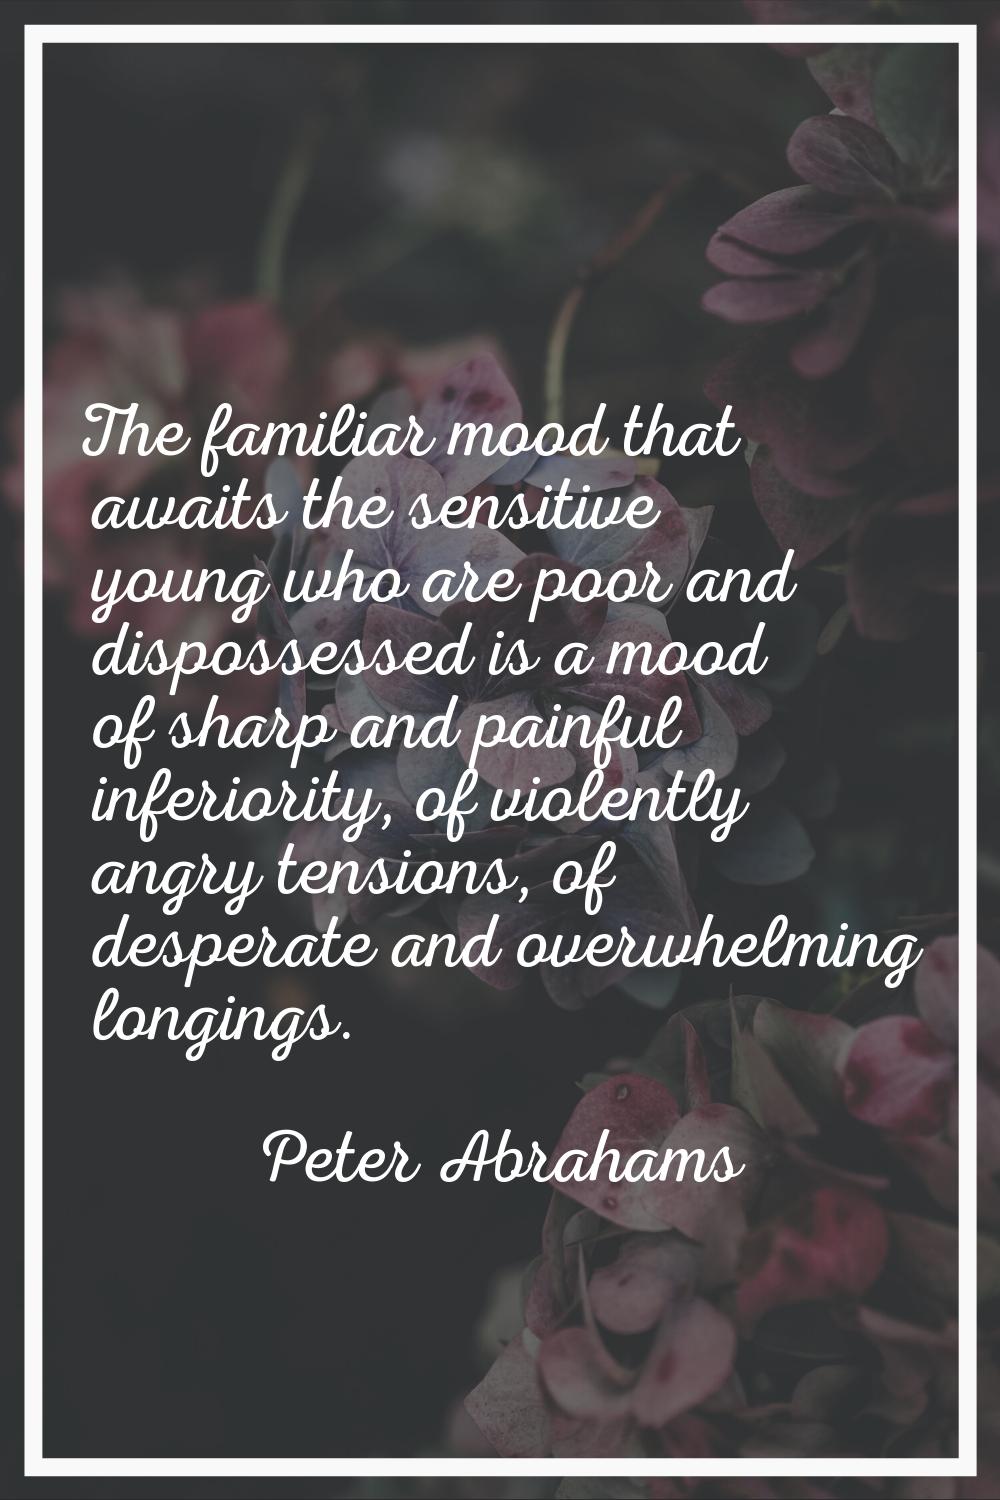 The familiar mood that awaits the sensitive young who are poor and dispossessed is a mood of sharp 